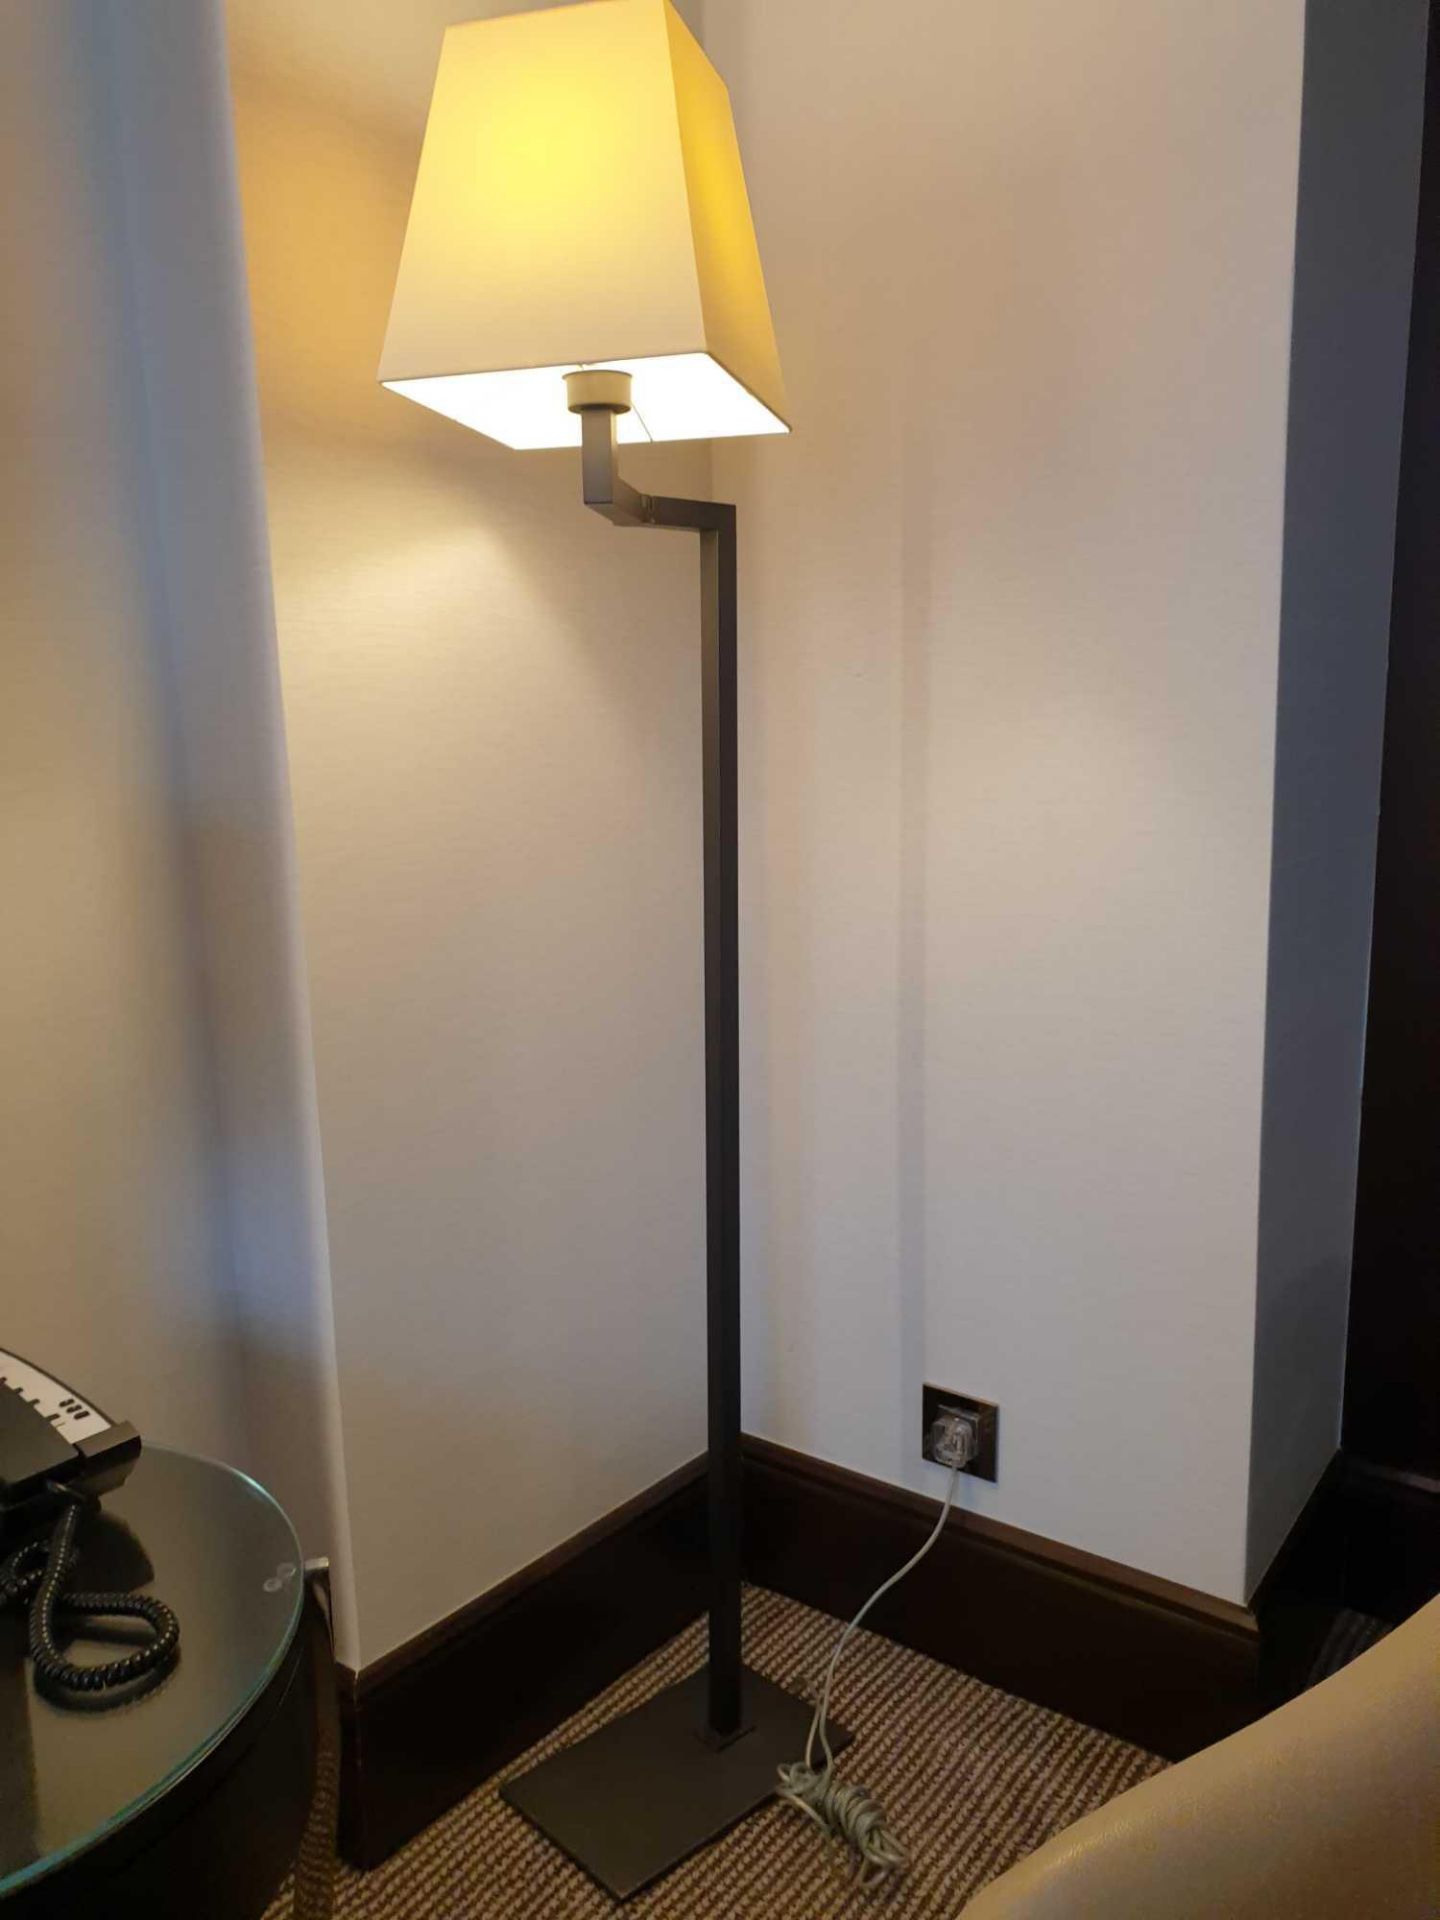 Sifra Floor Lamp Model LMS 600 ENG Grey Metal Base With Single Arm Single Bulb Complete With Cream - Bild 2 aus 3